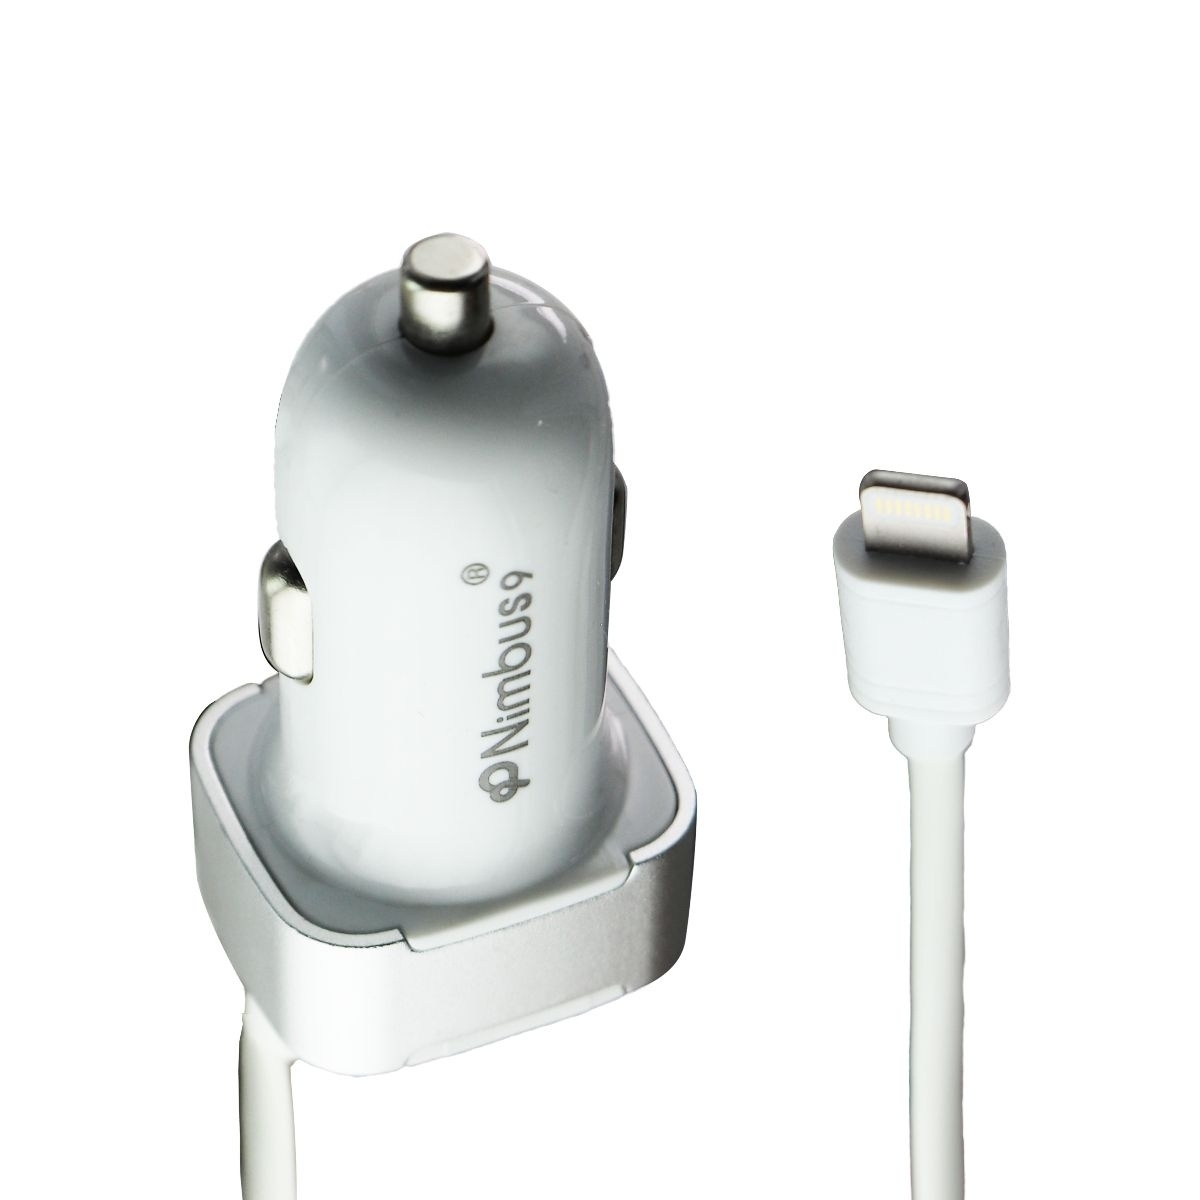 Nimbus9 Car Charger With 8-Pin Connecter Cable (6FT) And USB Port - White/Silver